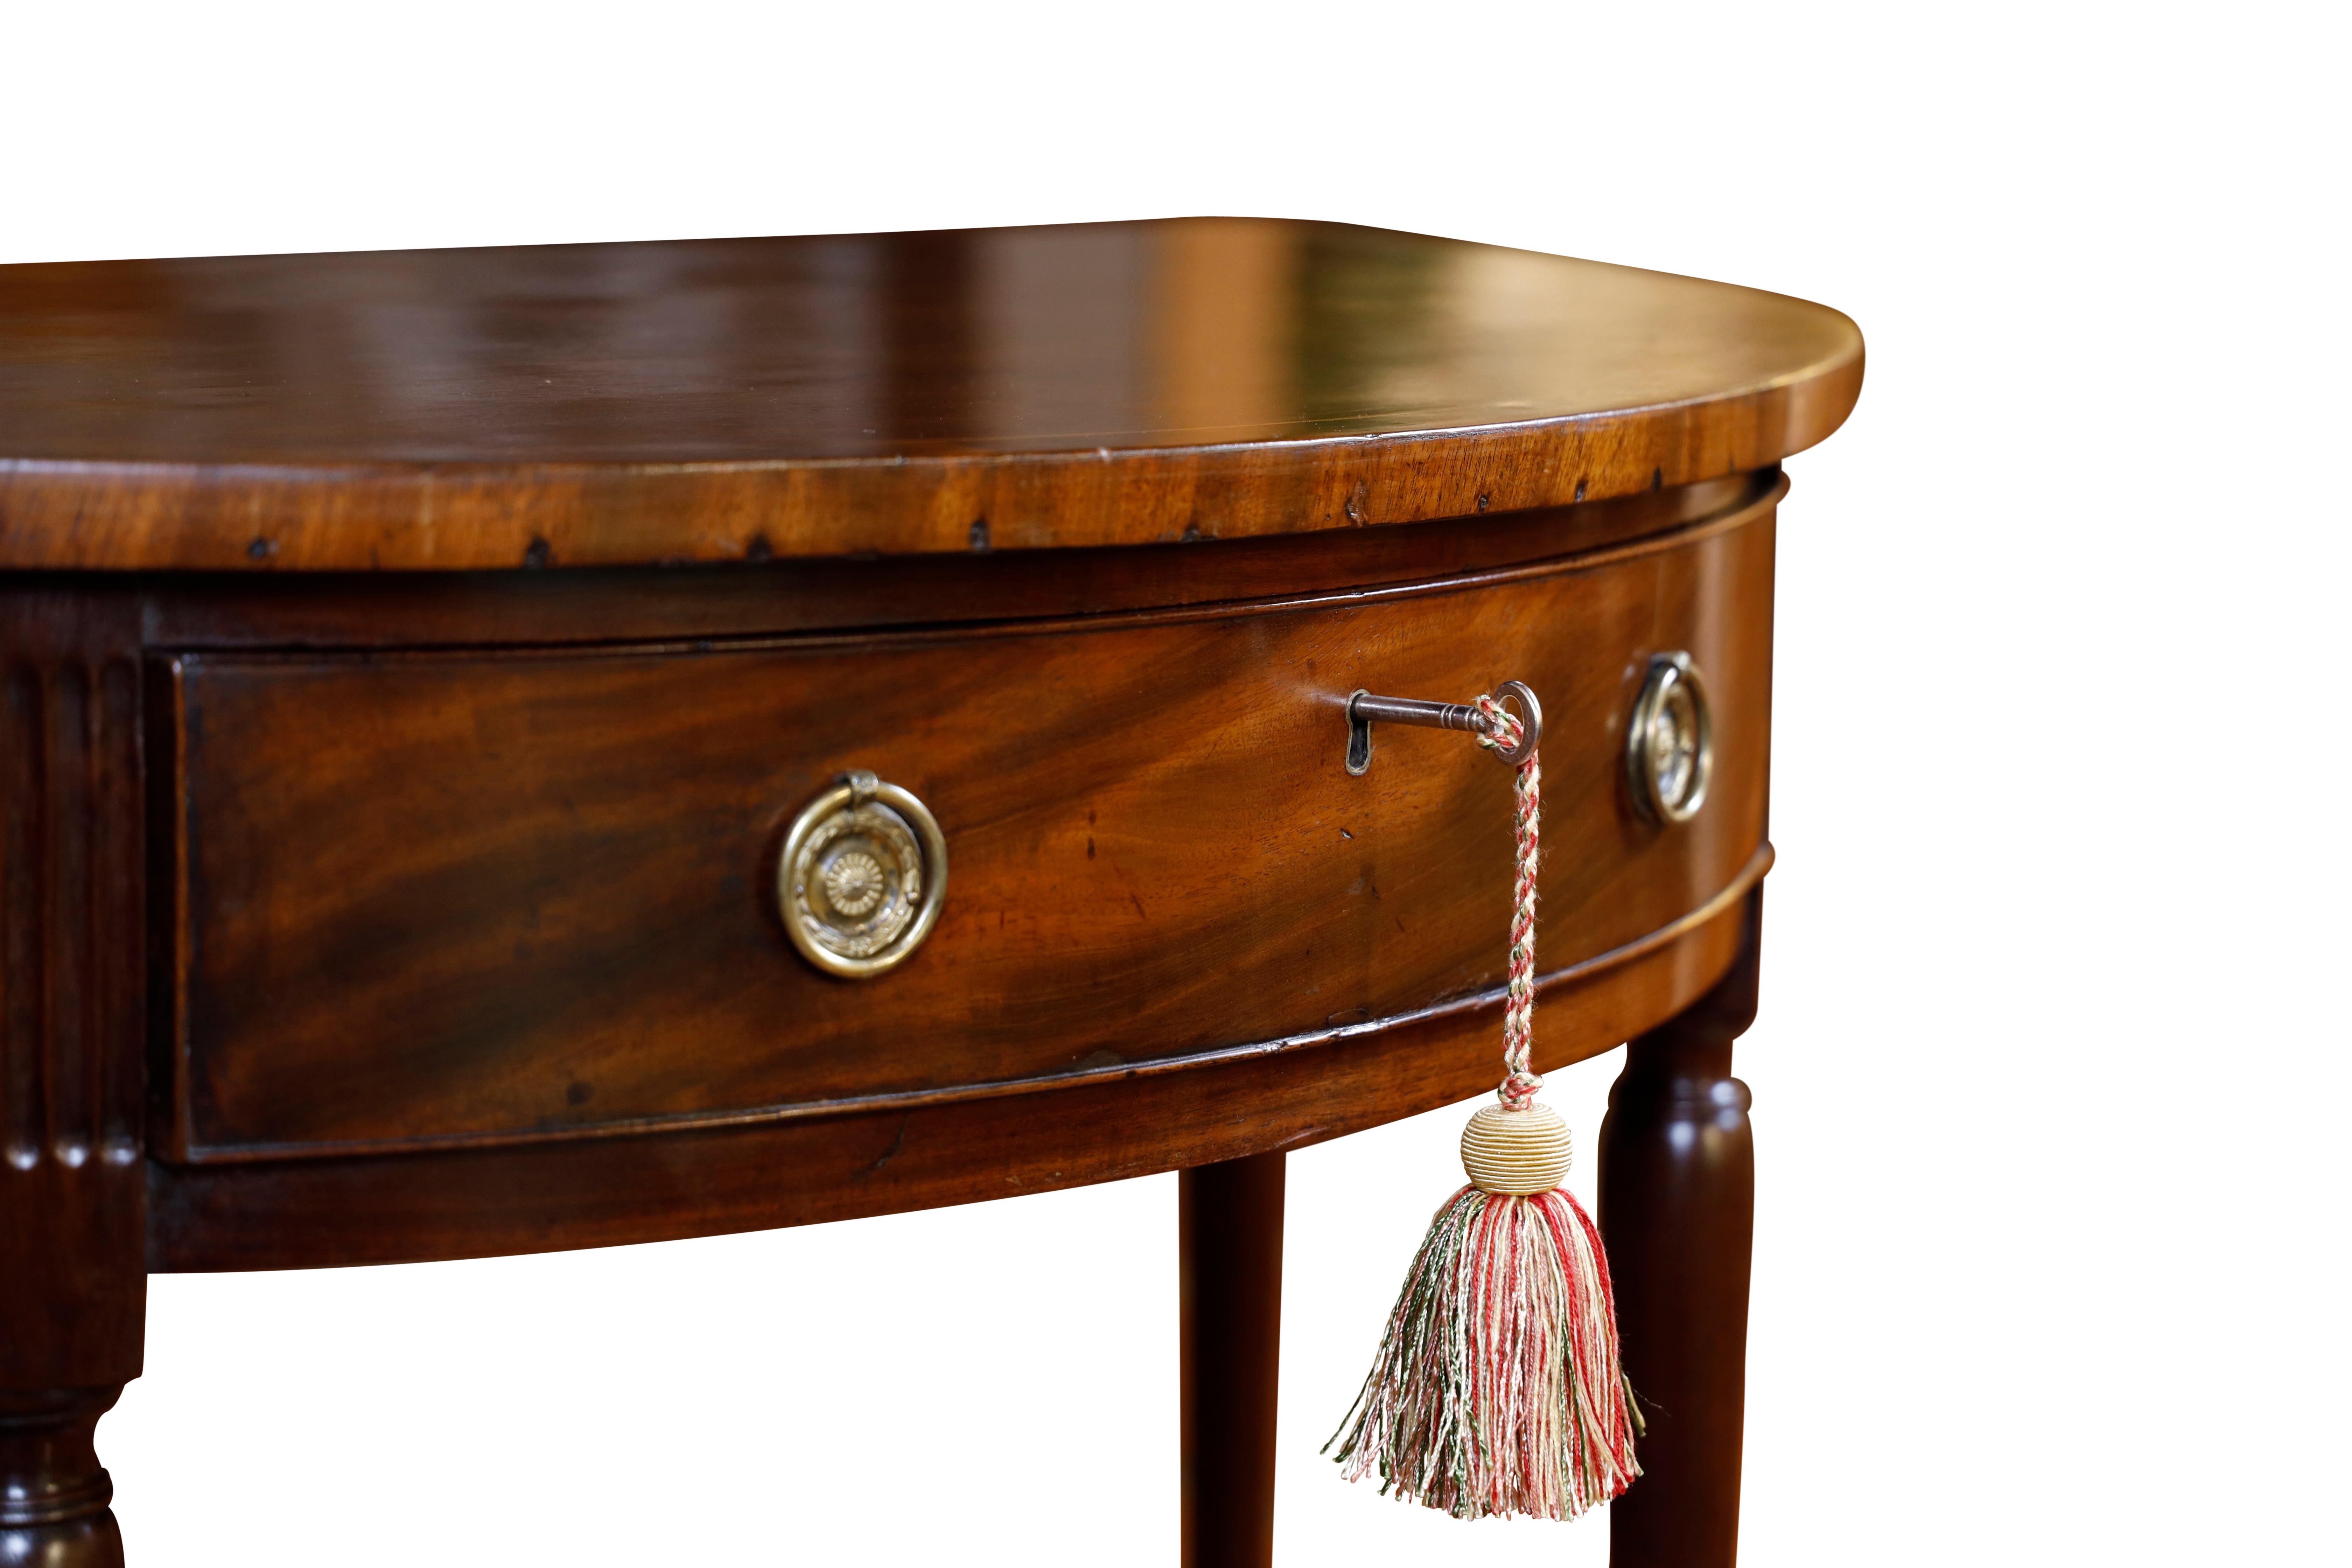 Georgian style mahogany demilune console table.  Top has mahogany crossbanding and satinwood string inlay.  Single oak lined drawer flanked by a cupboard door each side.  Table stands on turned legs.